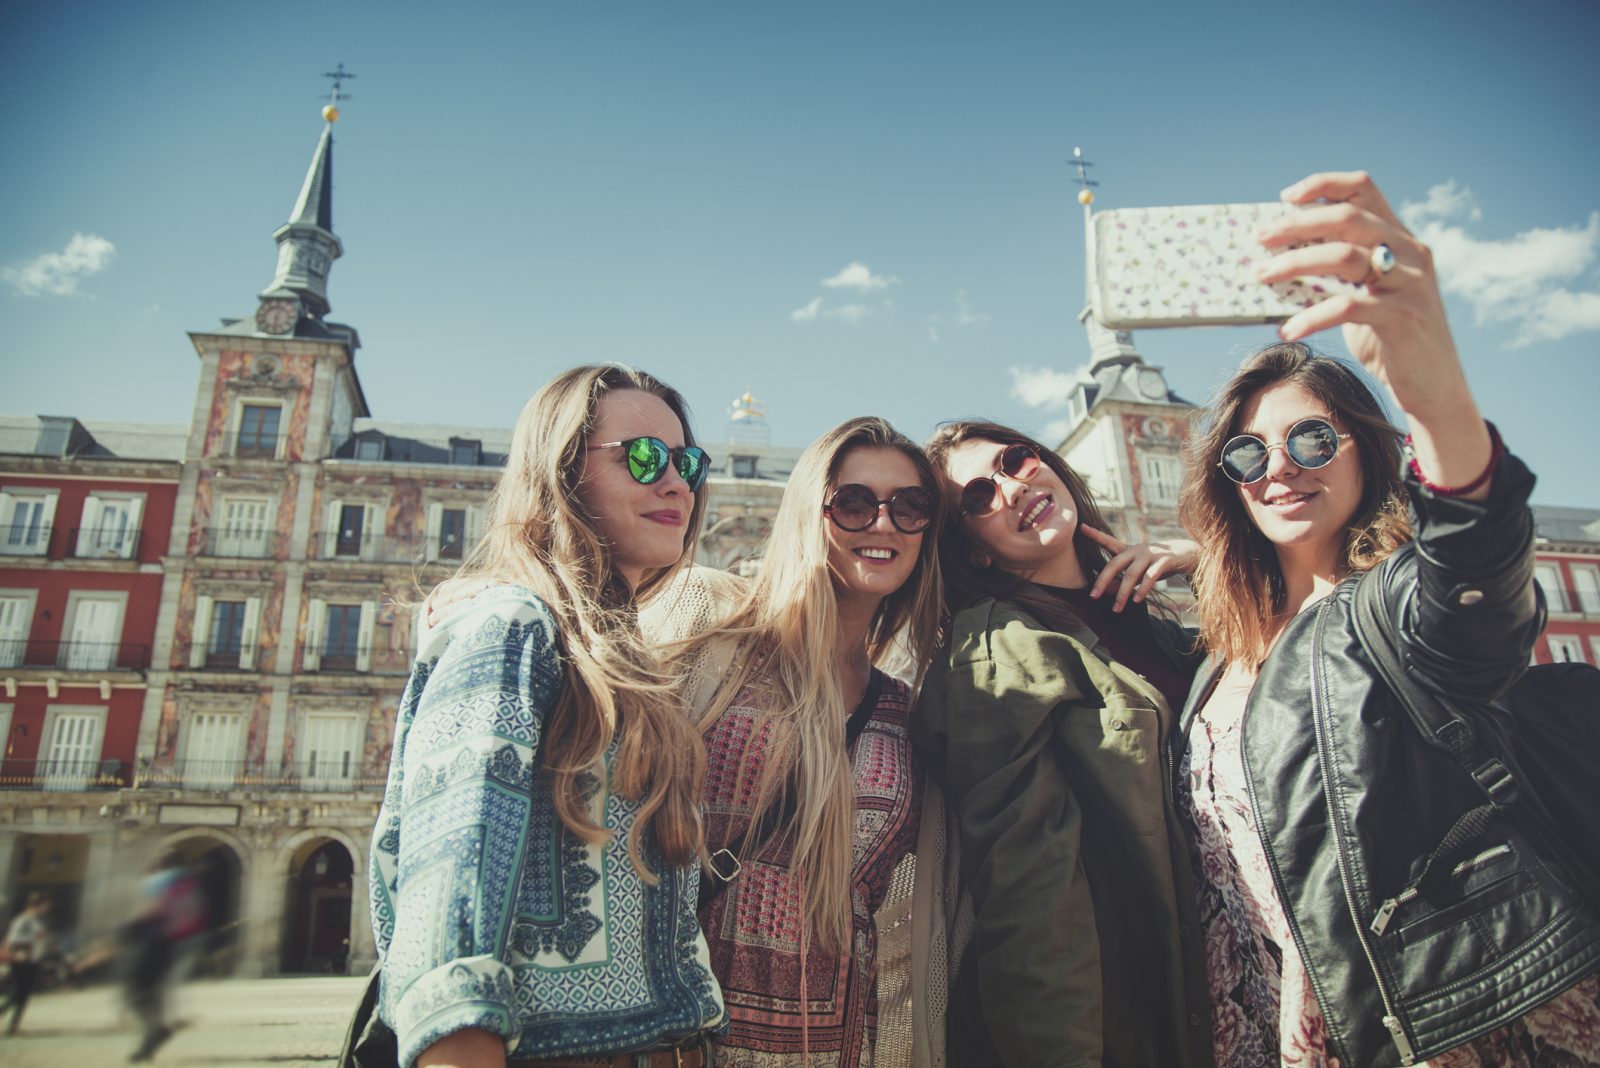 What US City Do I Belong In? Tourists Taking Selfie In Madrid, Spain